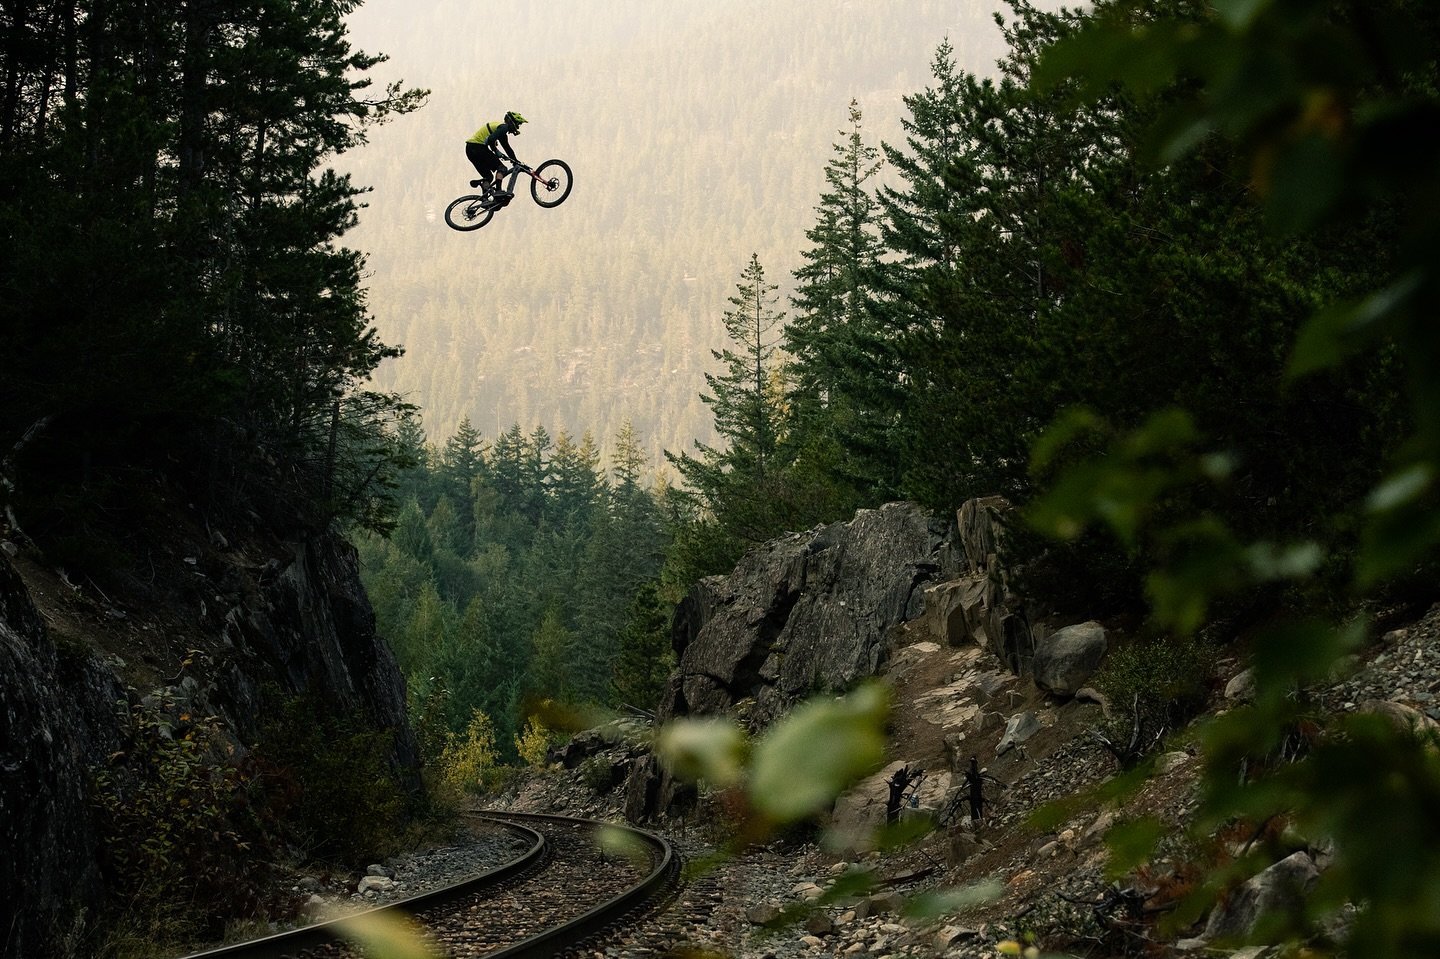 The first time you hit that train gap&hellip;
Woof. 
📷 @margusriga 
@bn3thapparel @shimanomtb @maxxisbike @tannusarmour @lezyneofficial 
#freeride #MTB #bc #sports #jump #gullyverstravels